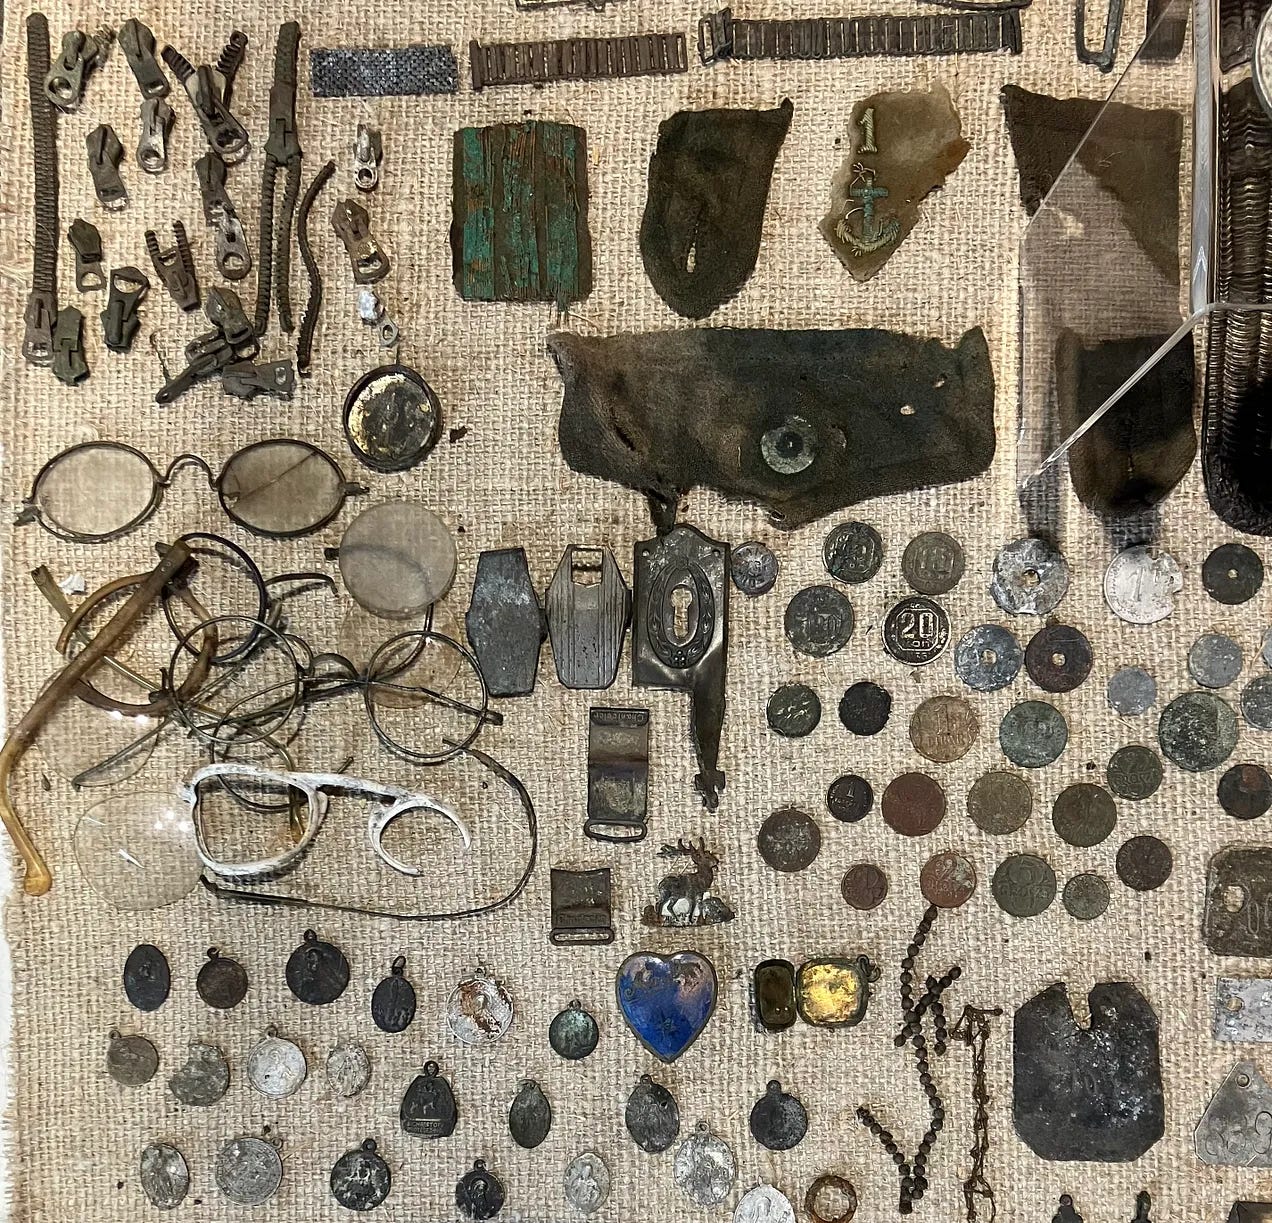 Personal items belonging to POWs like spectacles and zips